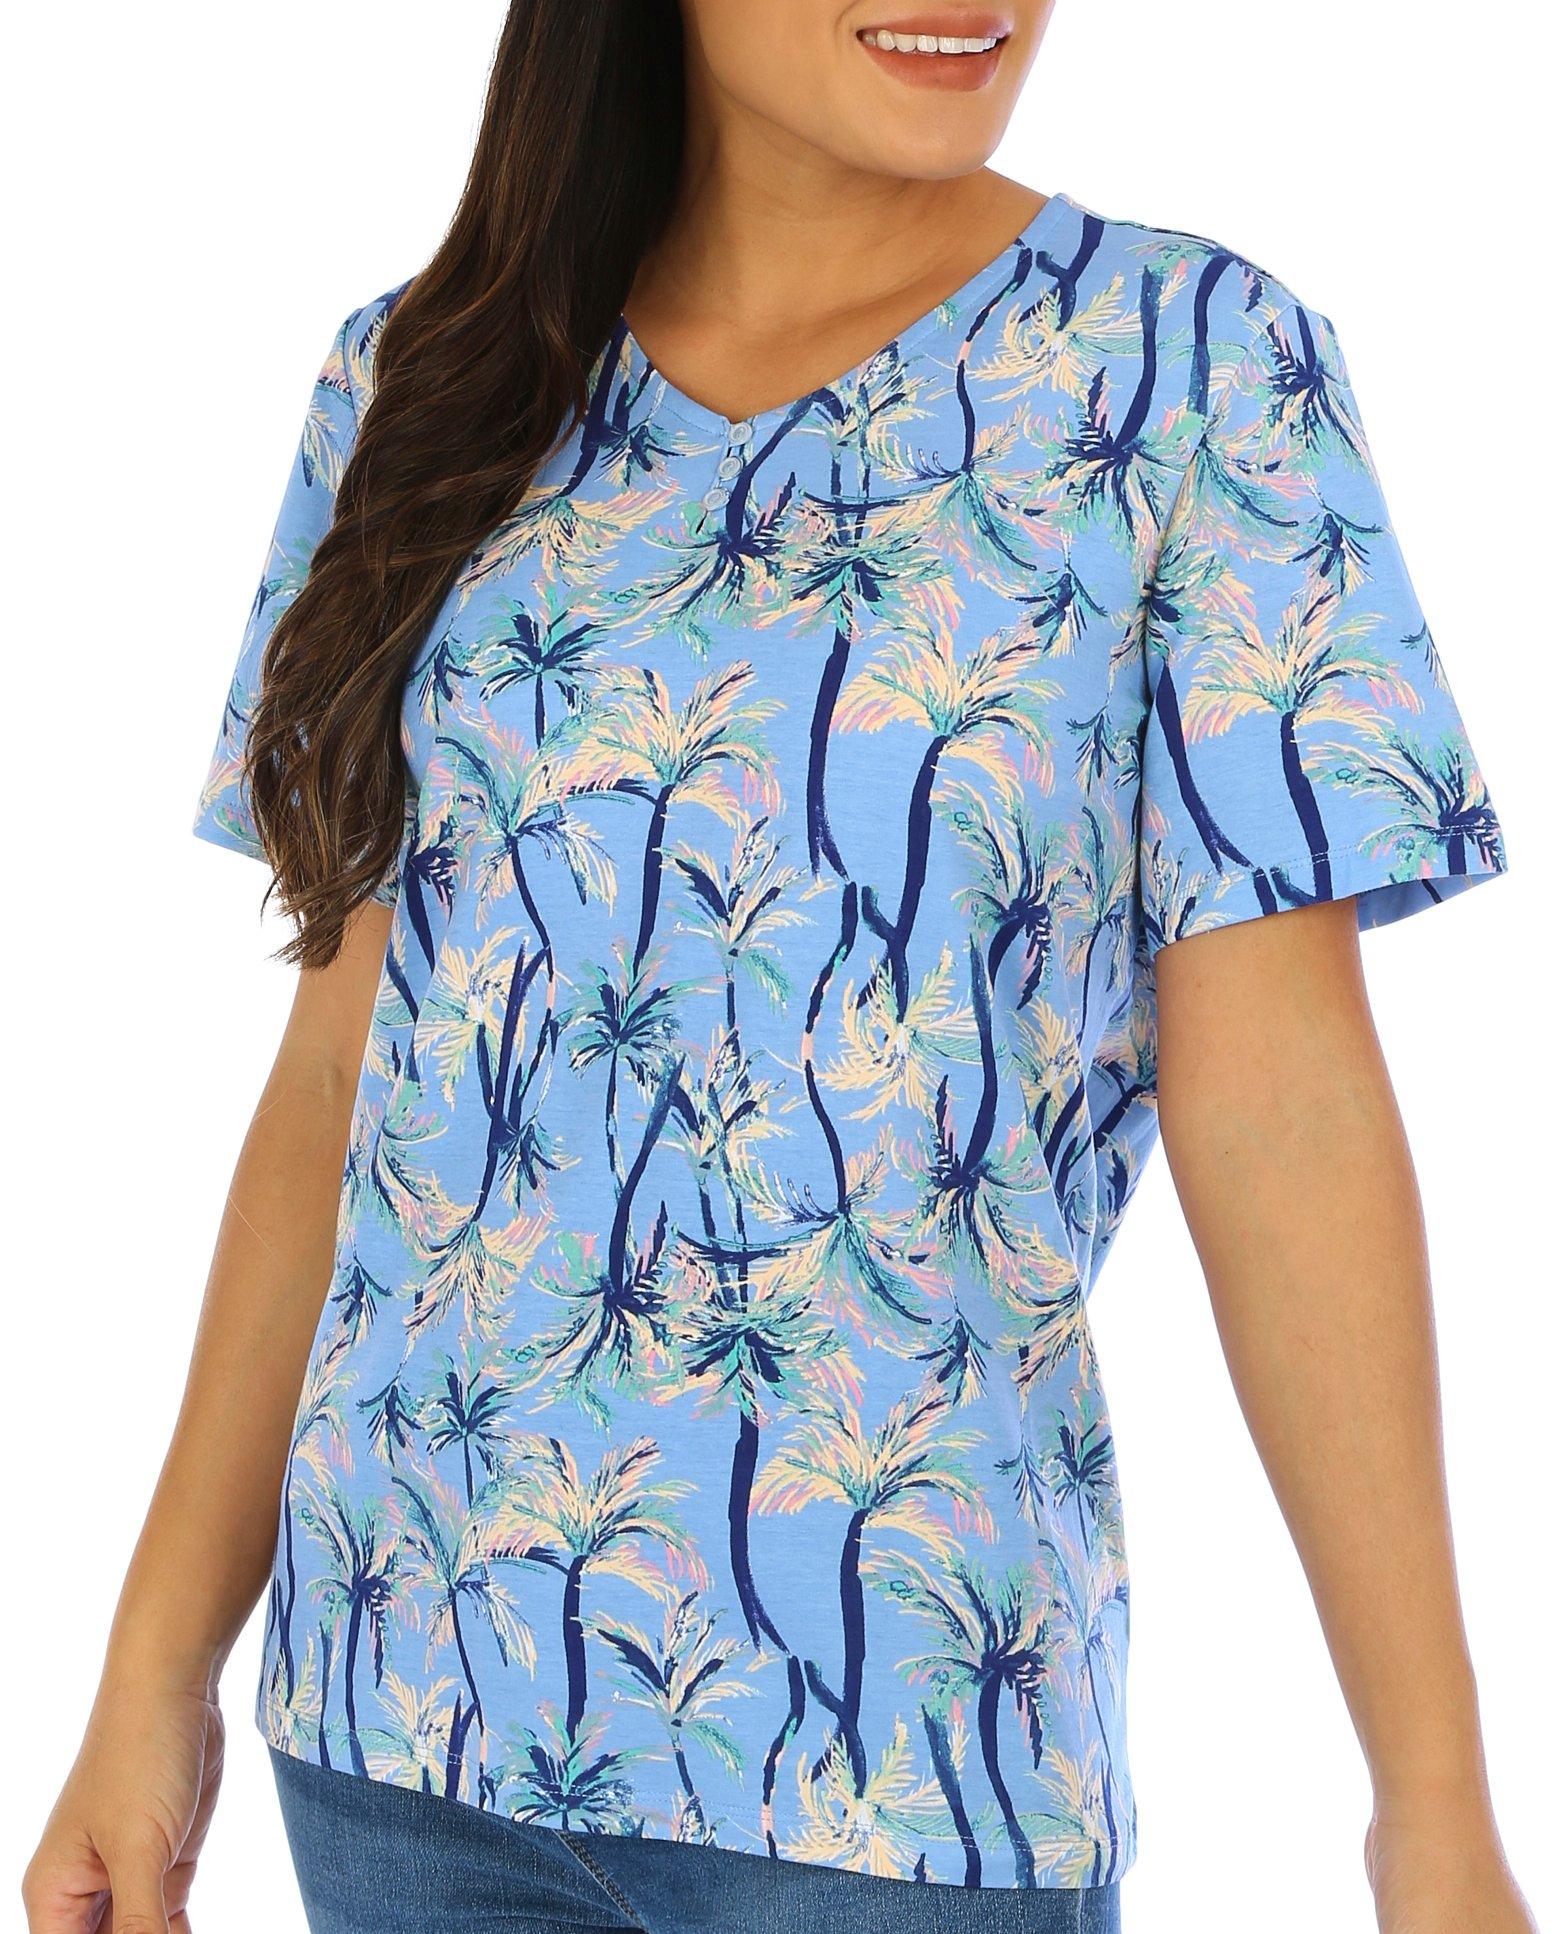 Coral Bay Petite Palm Print Henley Short Sleeve Top